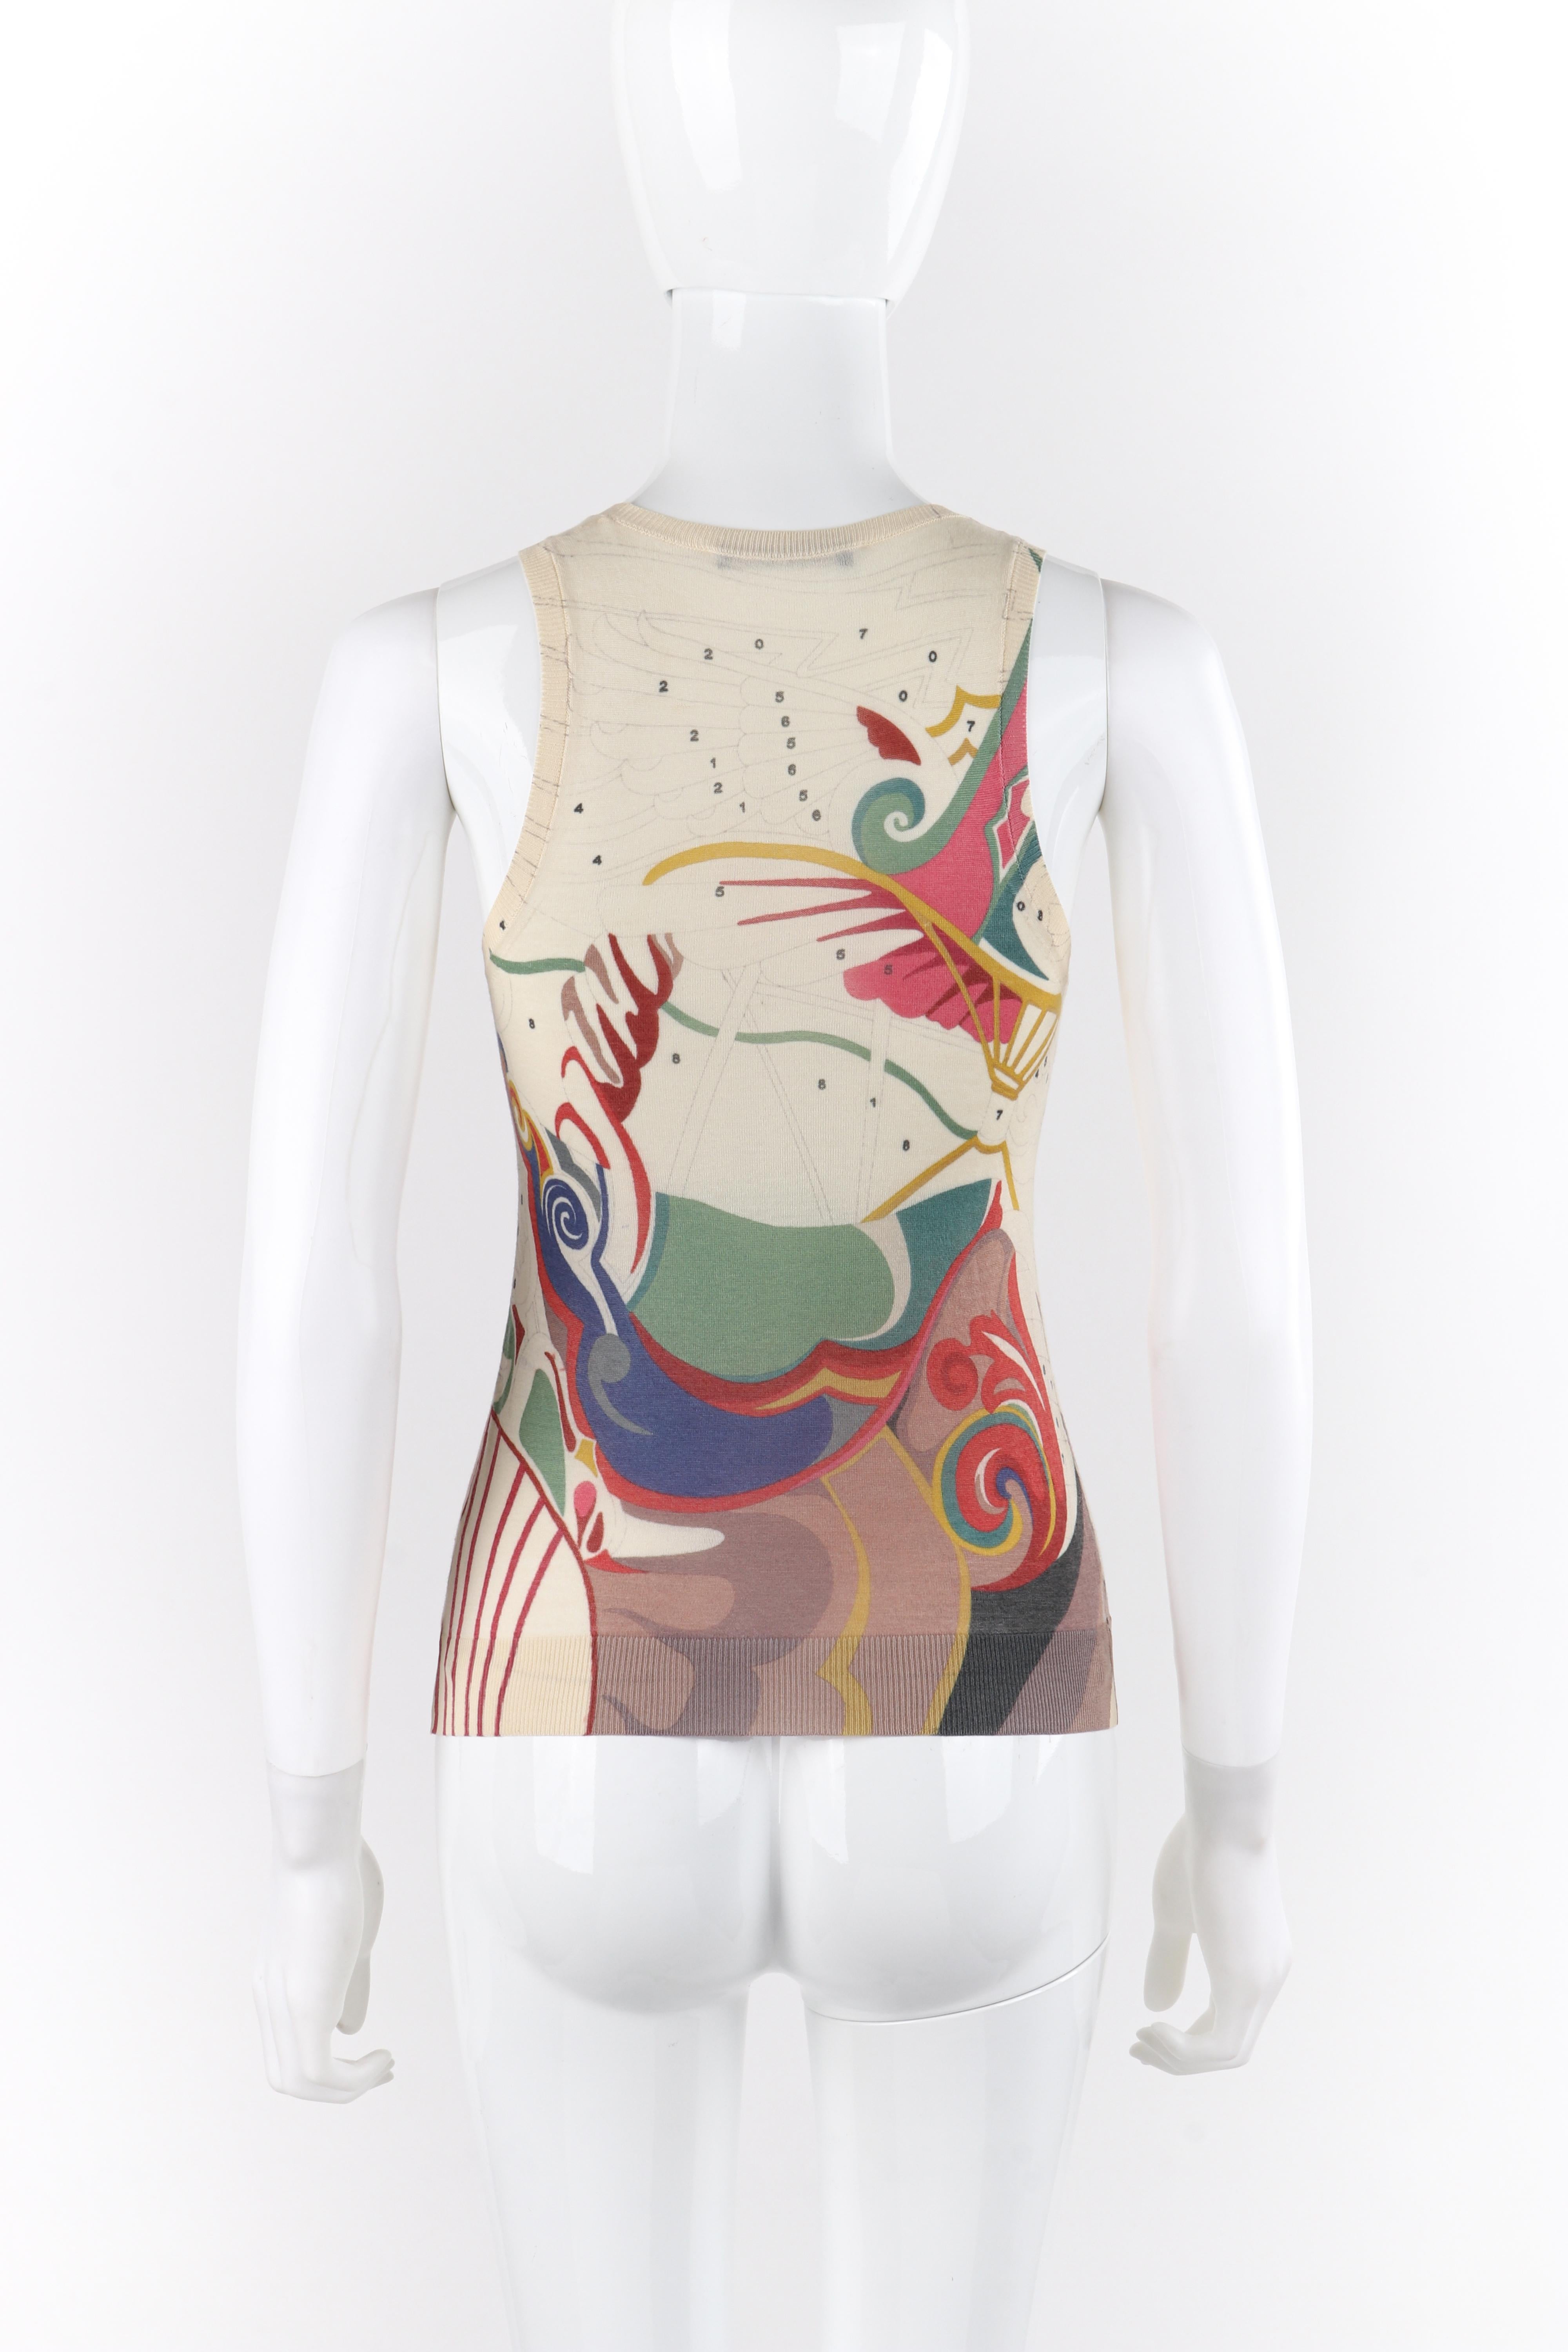 Women's ALEXANDER McQUEEN S/S 2005 “It's Only a Game” Carousel Horse Sleeveless Knit Top